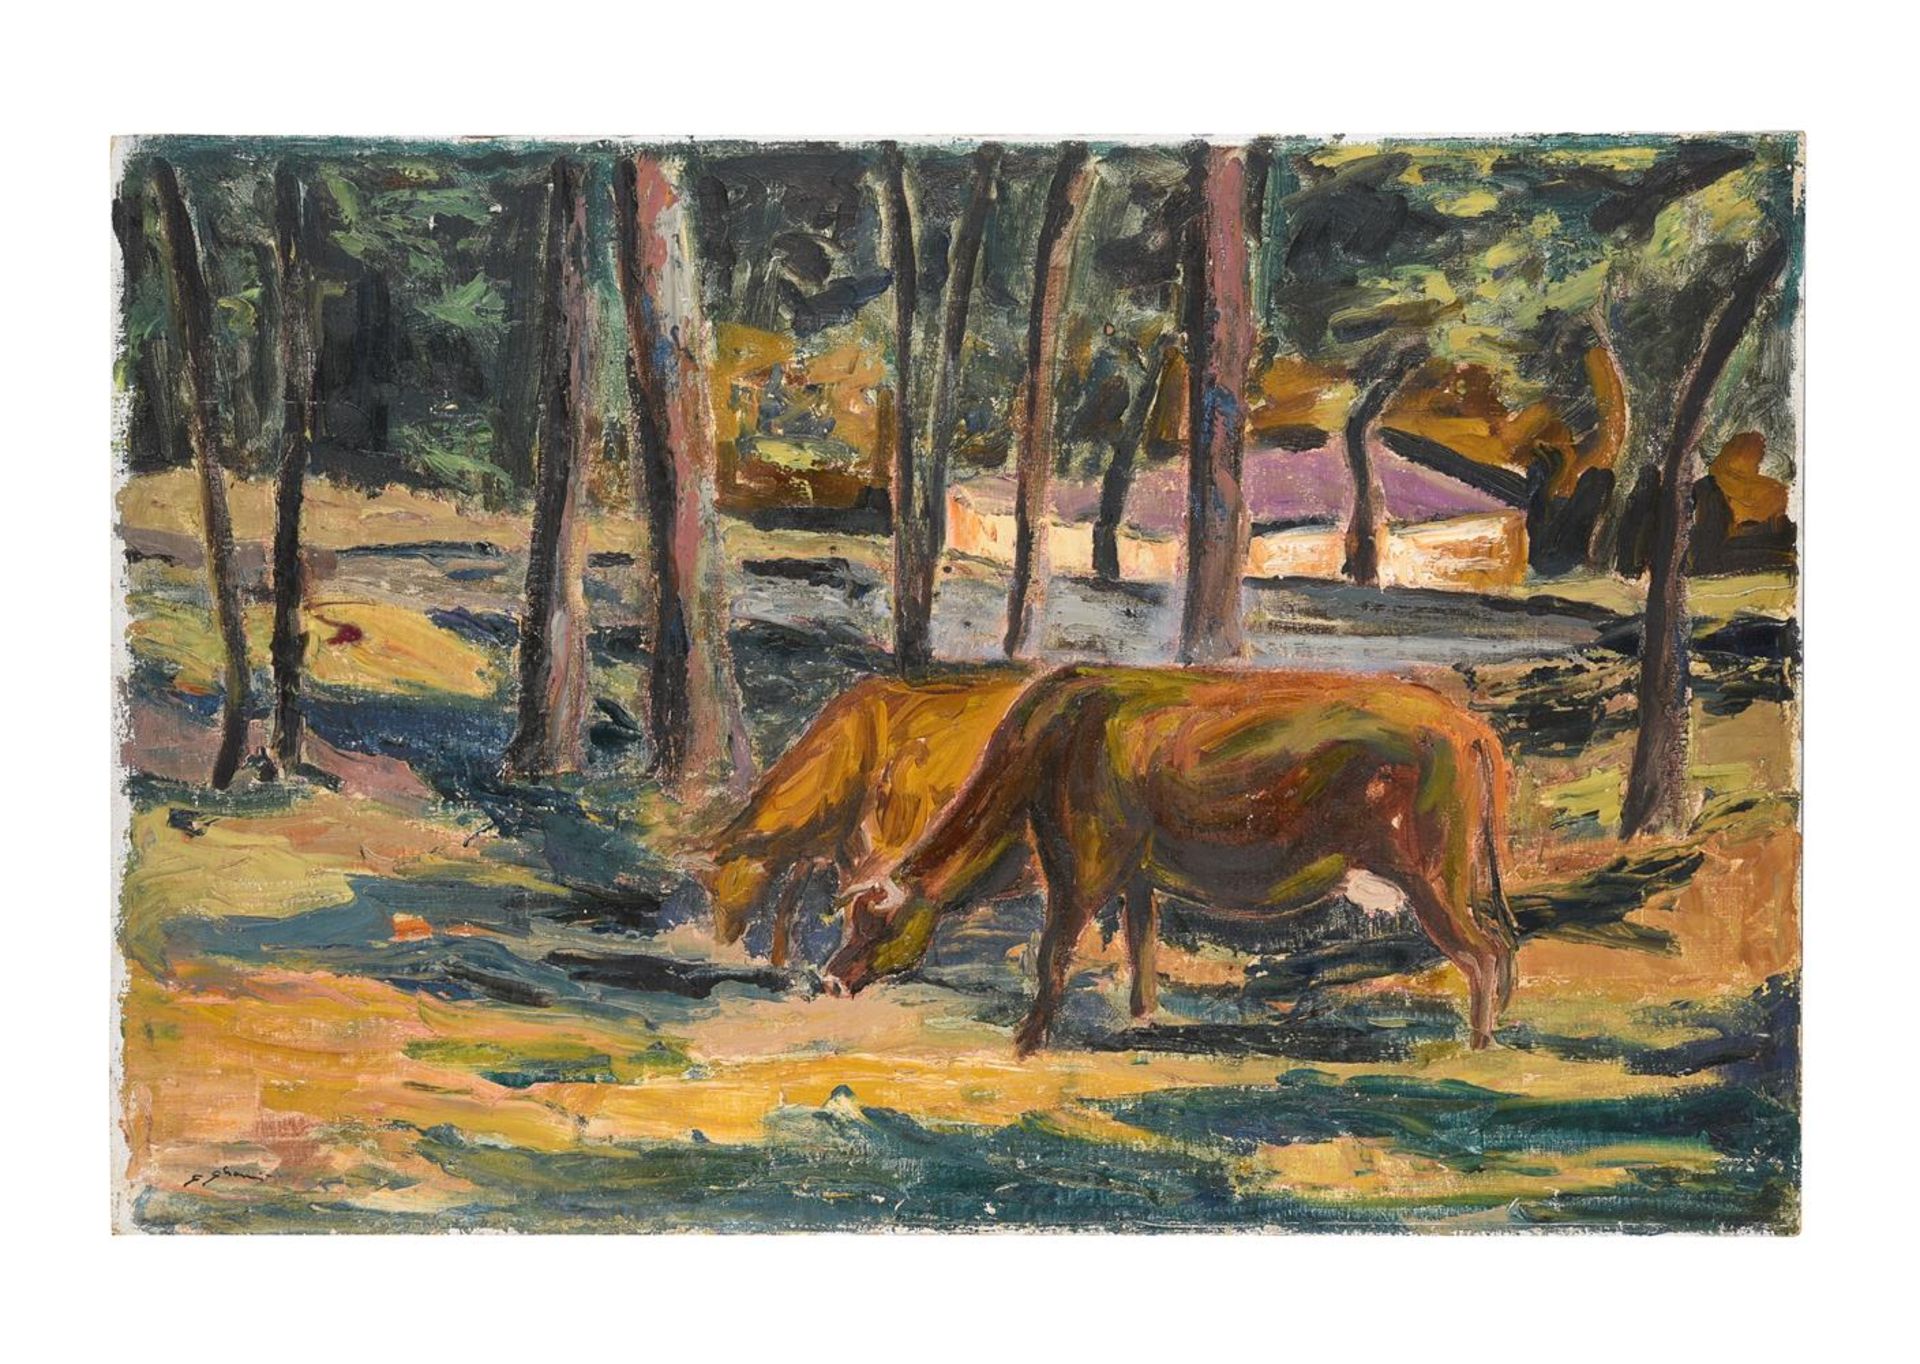 STELLA SHAWZIN (SOUTH AFRICAN 1920-2020), CATTLE GRAZING IN THE WOODLAND